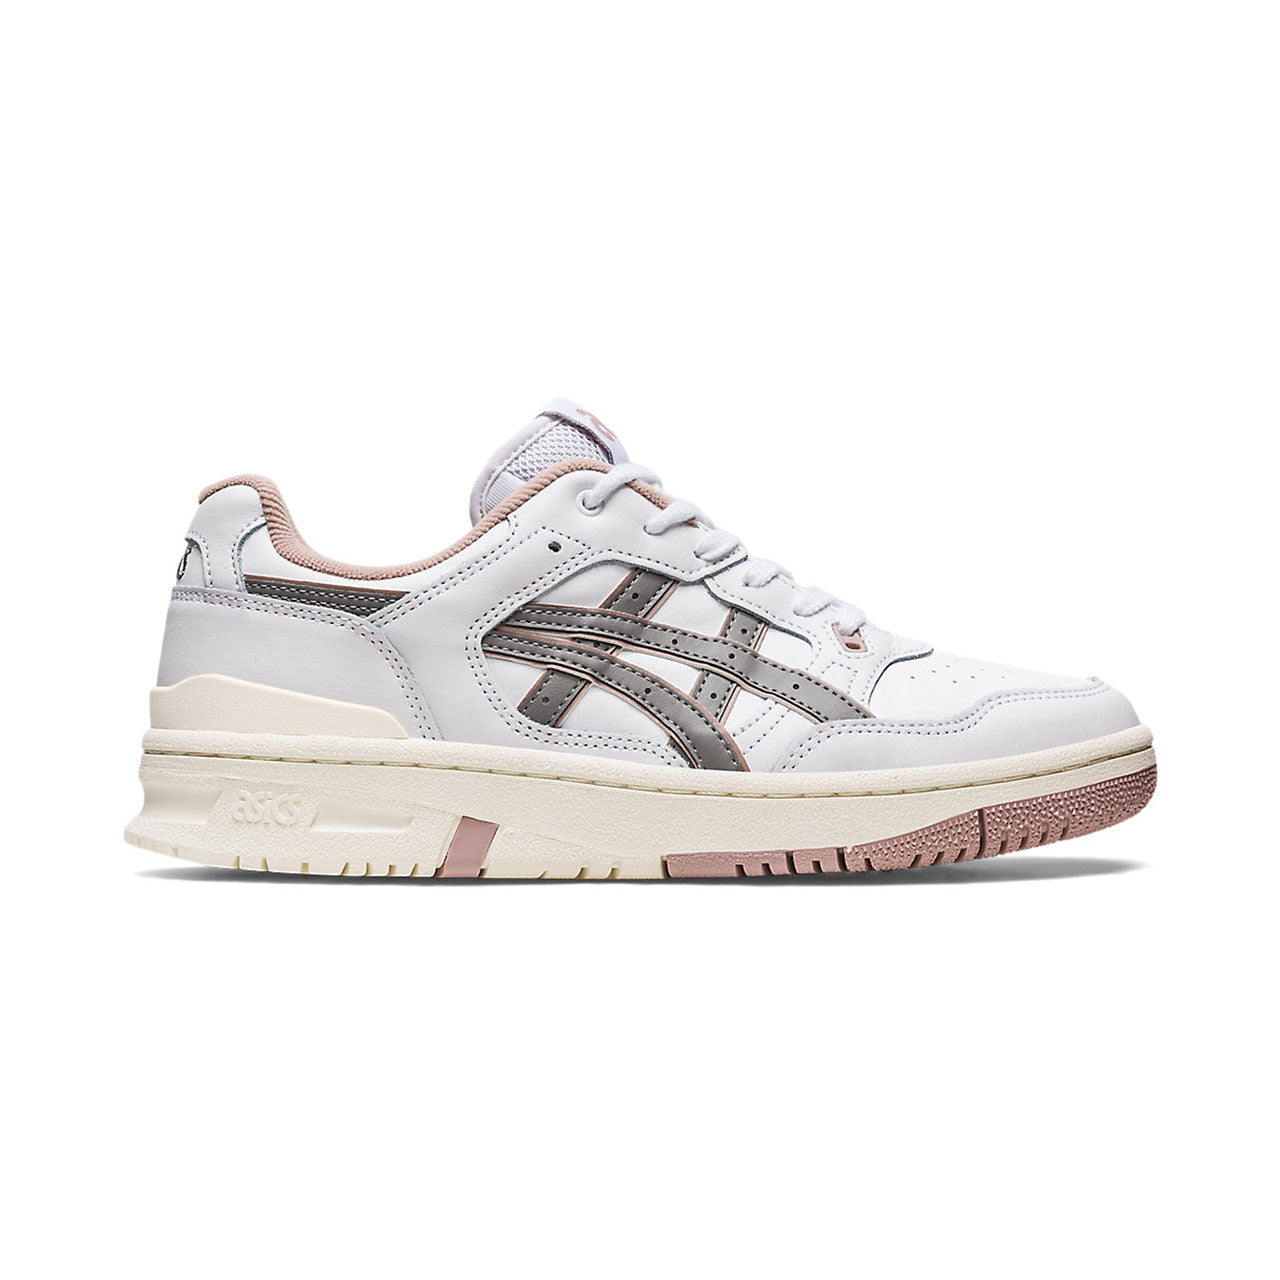 Asics EX89 White Clay Grey Sneakers